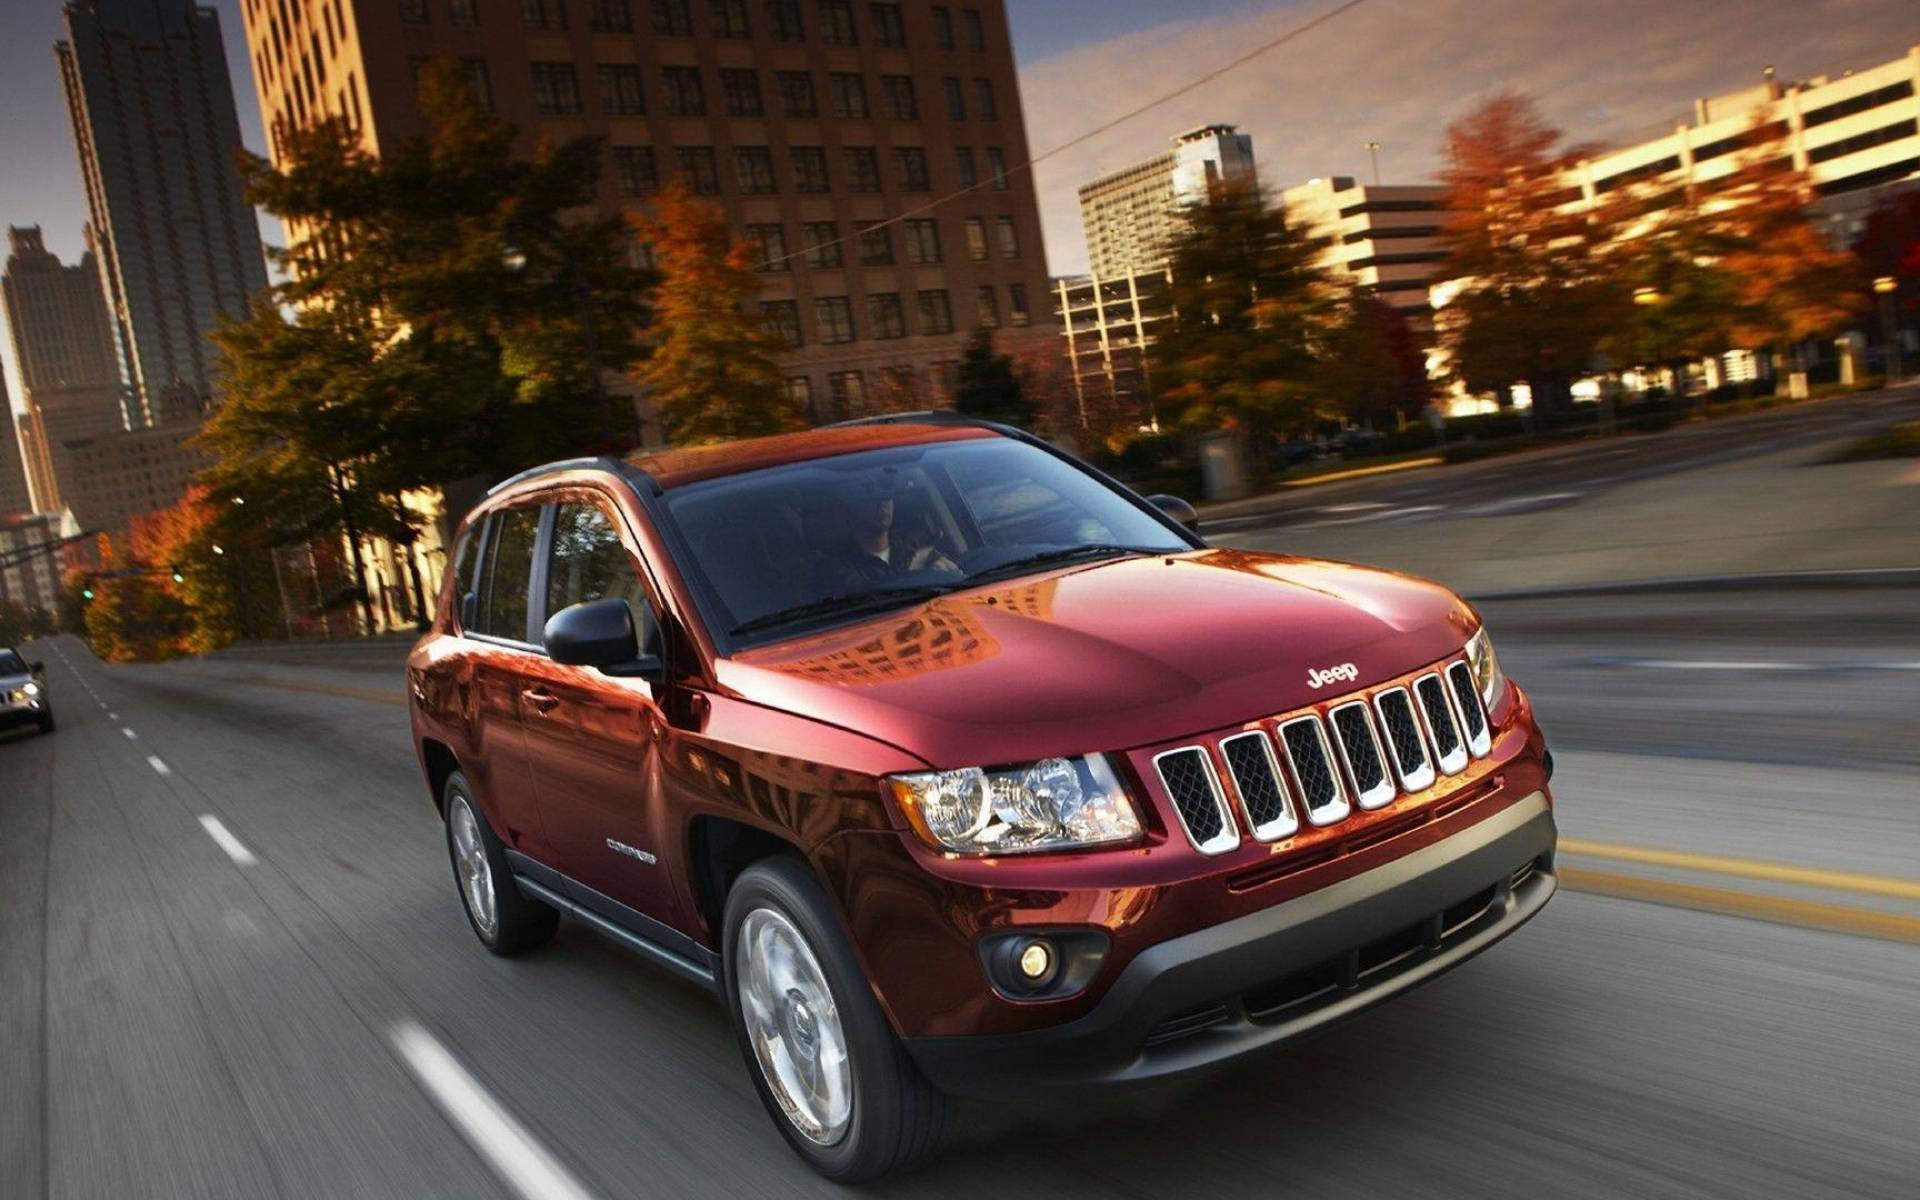 Jeep Compass, Pickup truck design, Off-road capabilities, Utility and style, 1920x1200 HD Desktop